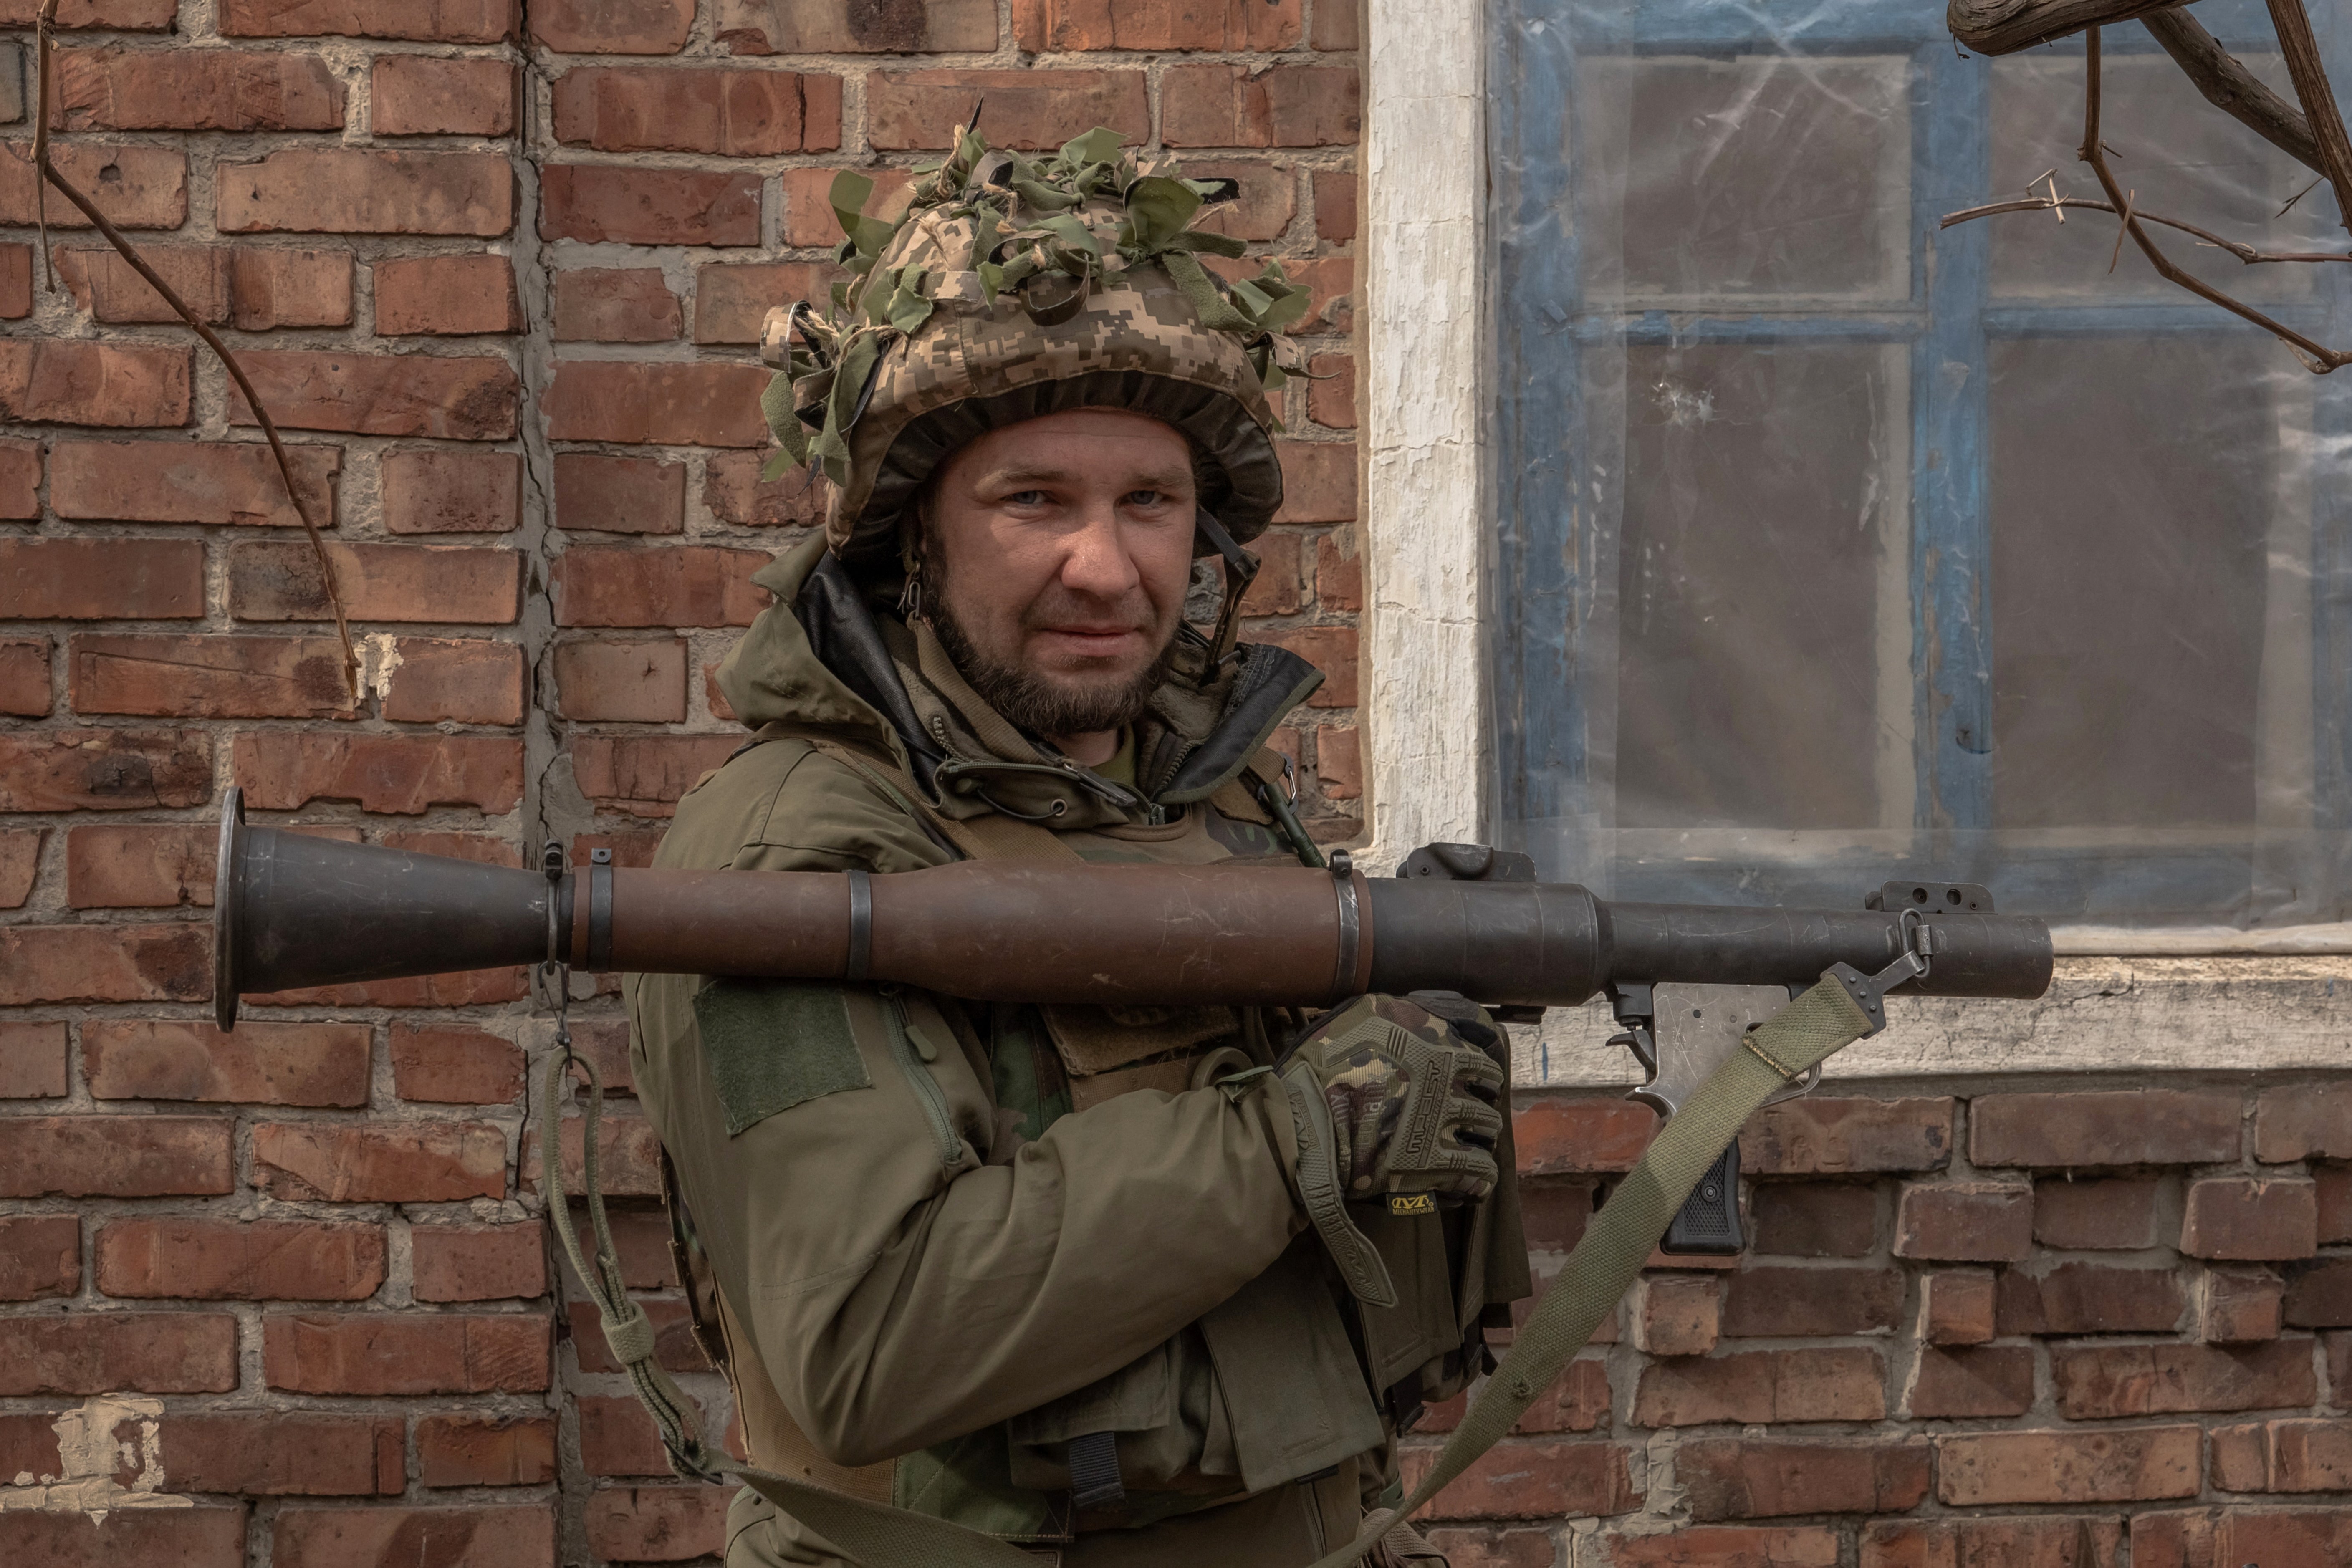 Ukraine’s soldiers have been desperate for more weapons to reach the front line